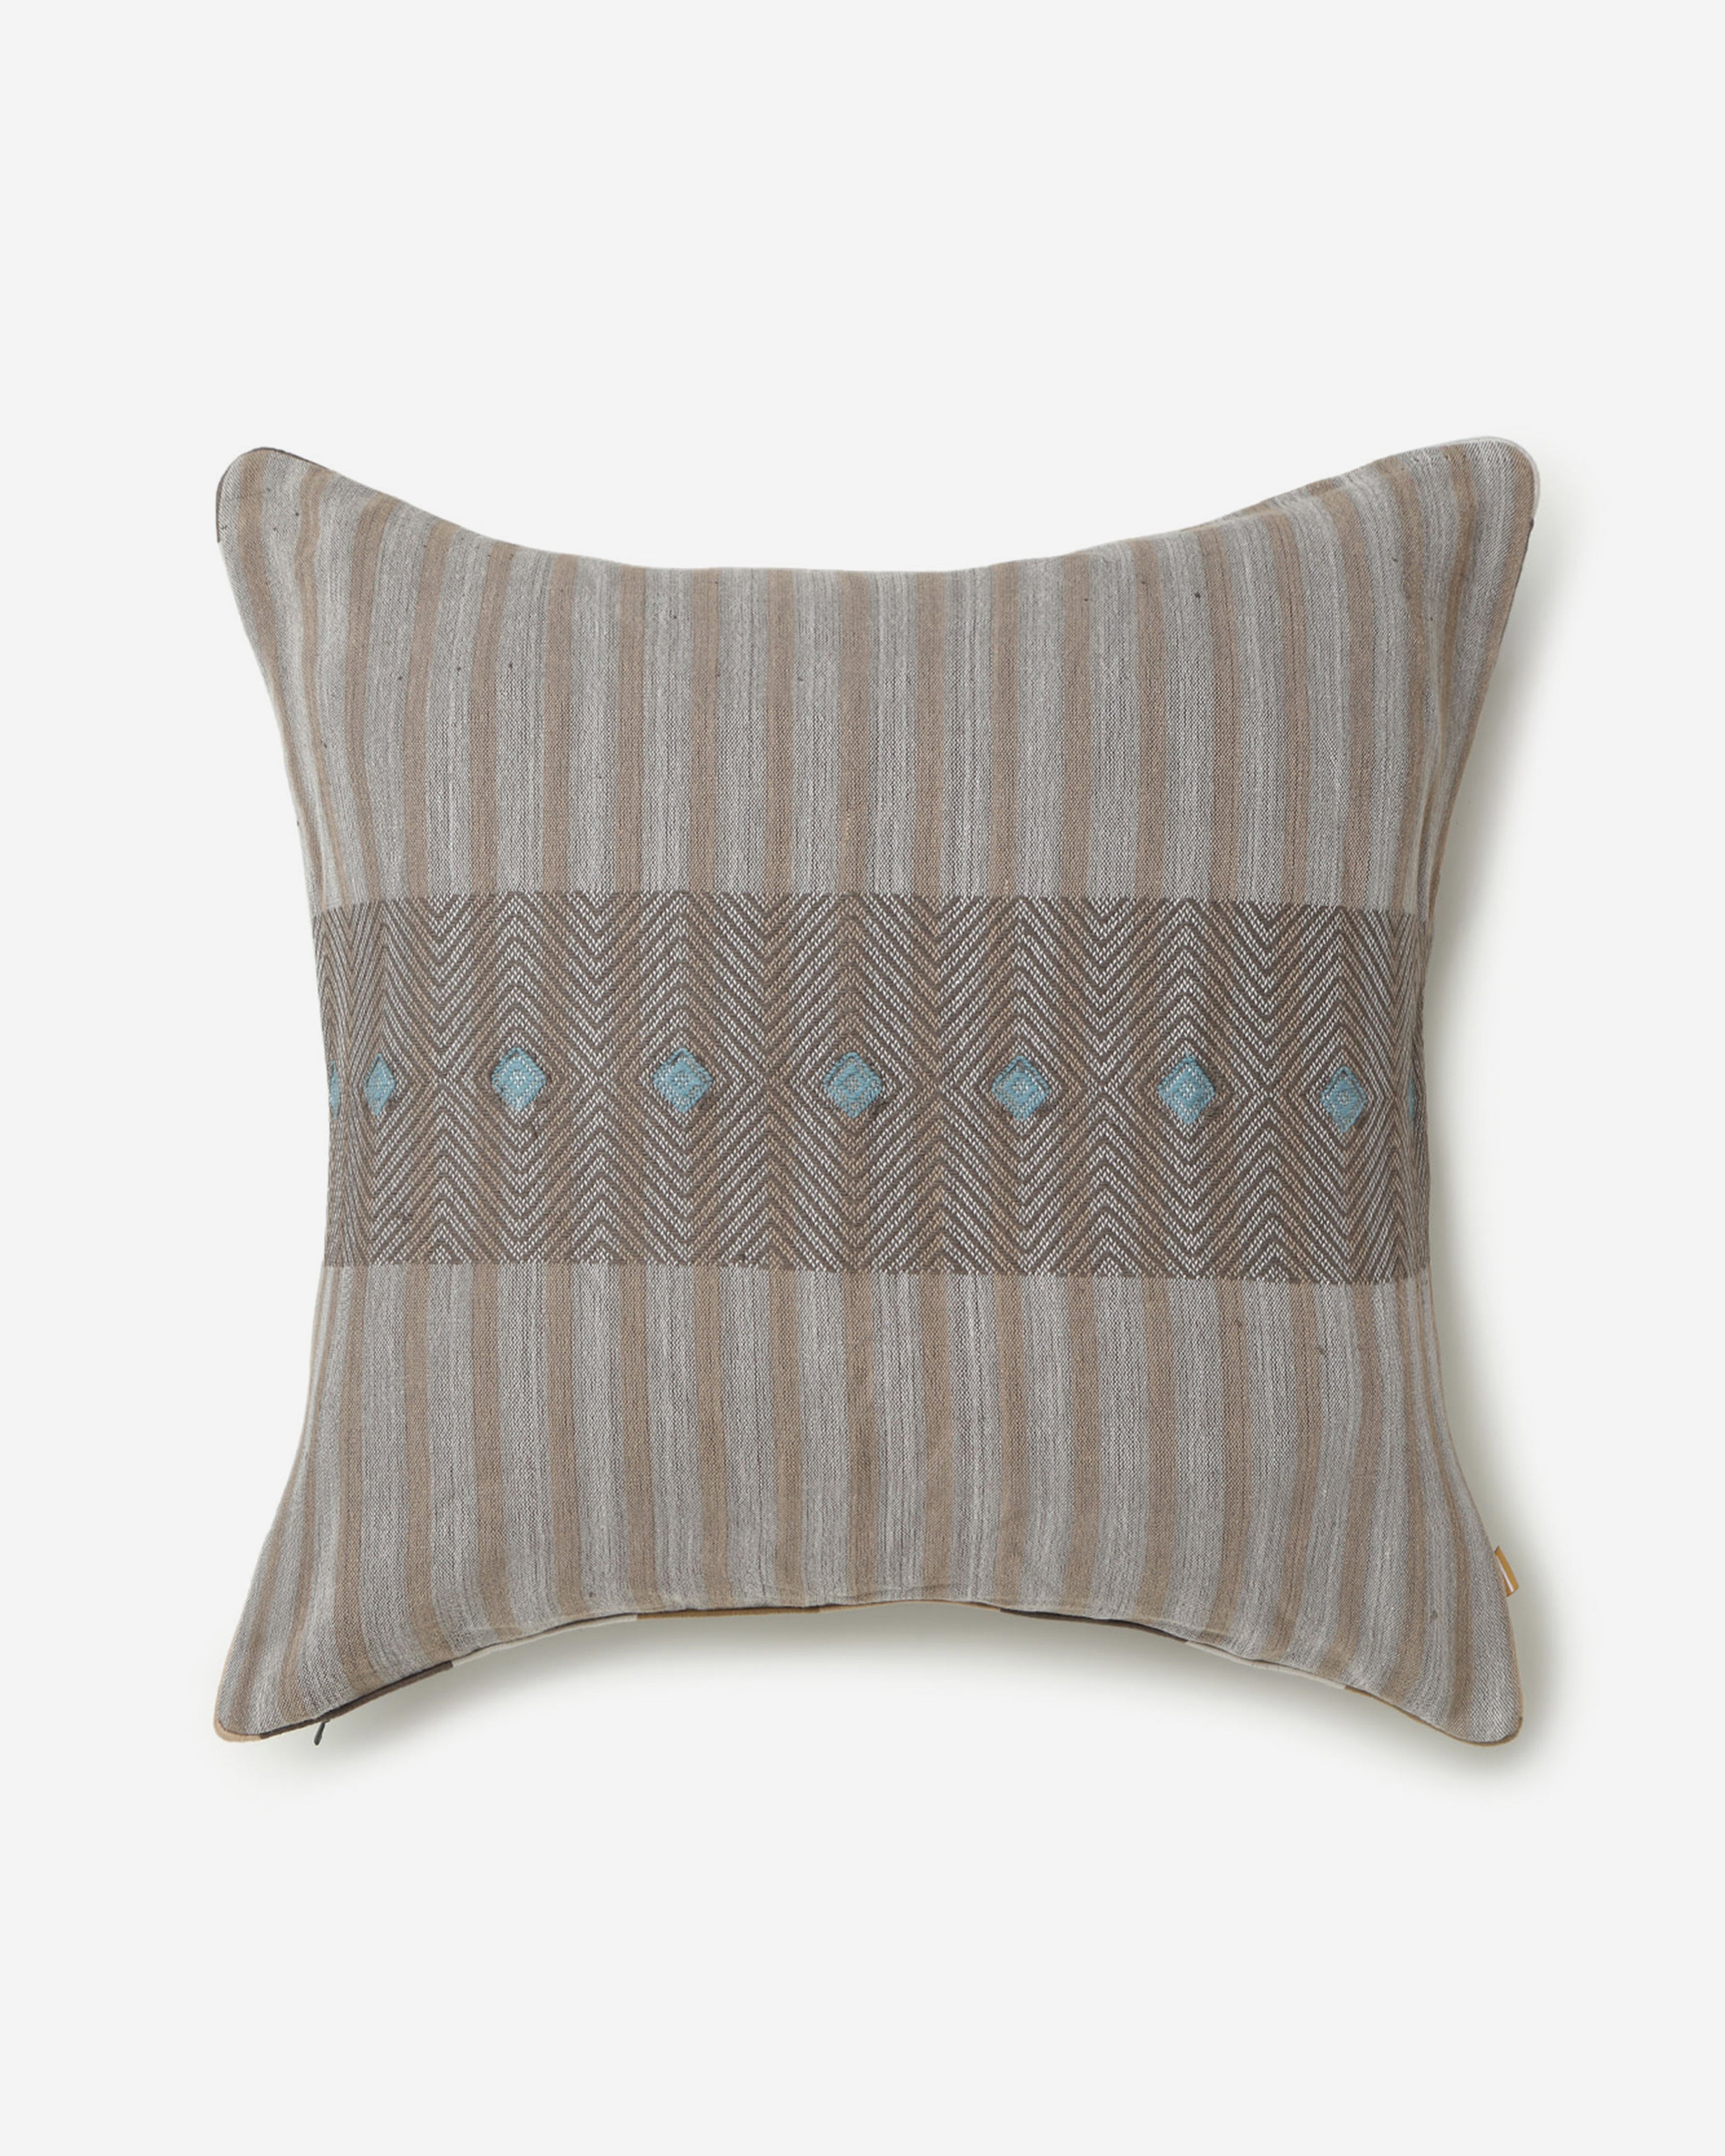 Muji Extra Weft Cotton Cushion Cover